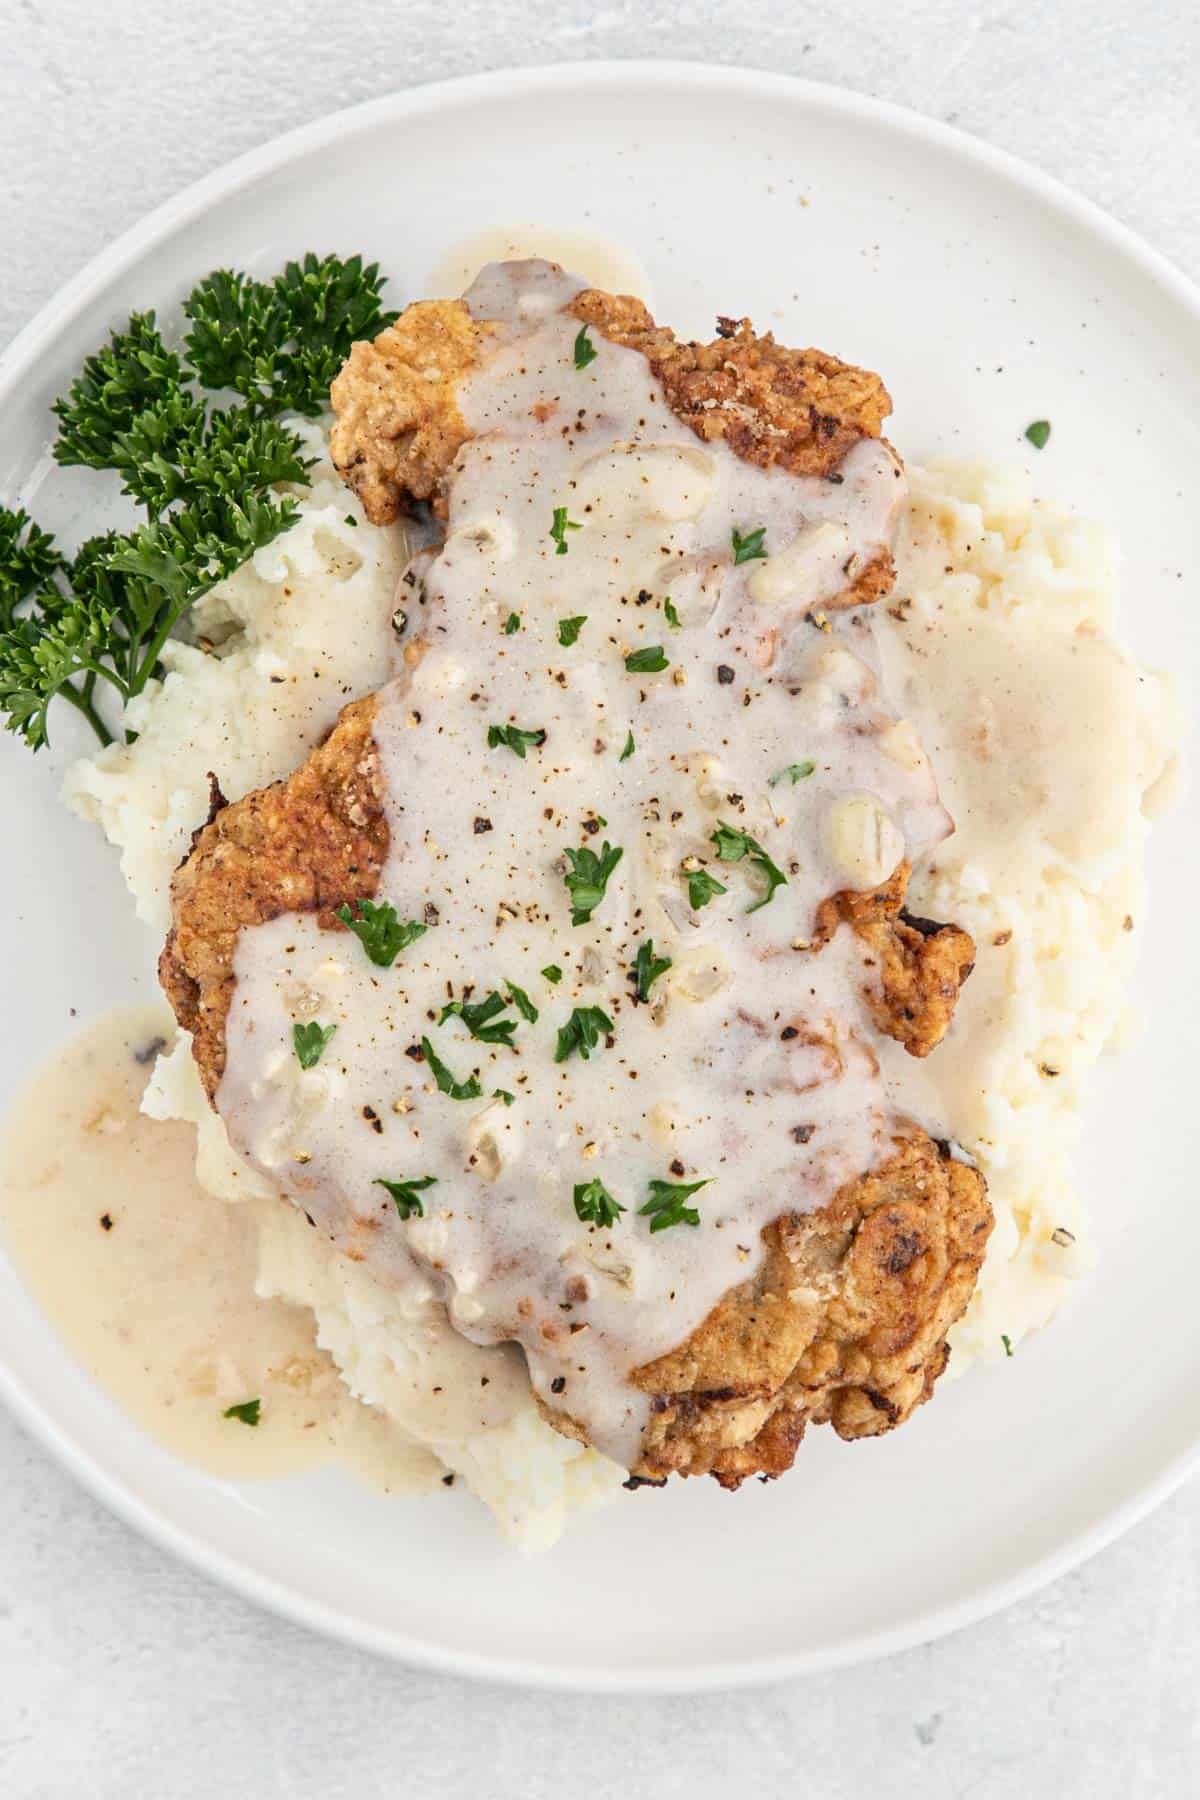 A plate of chicken fried steak served over mashed potatoes with gravy